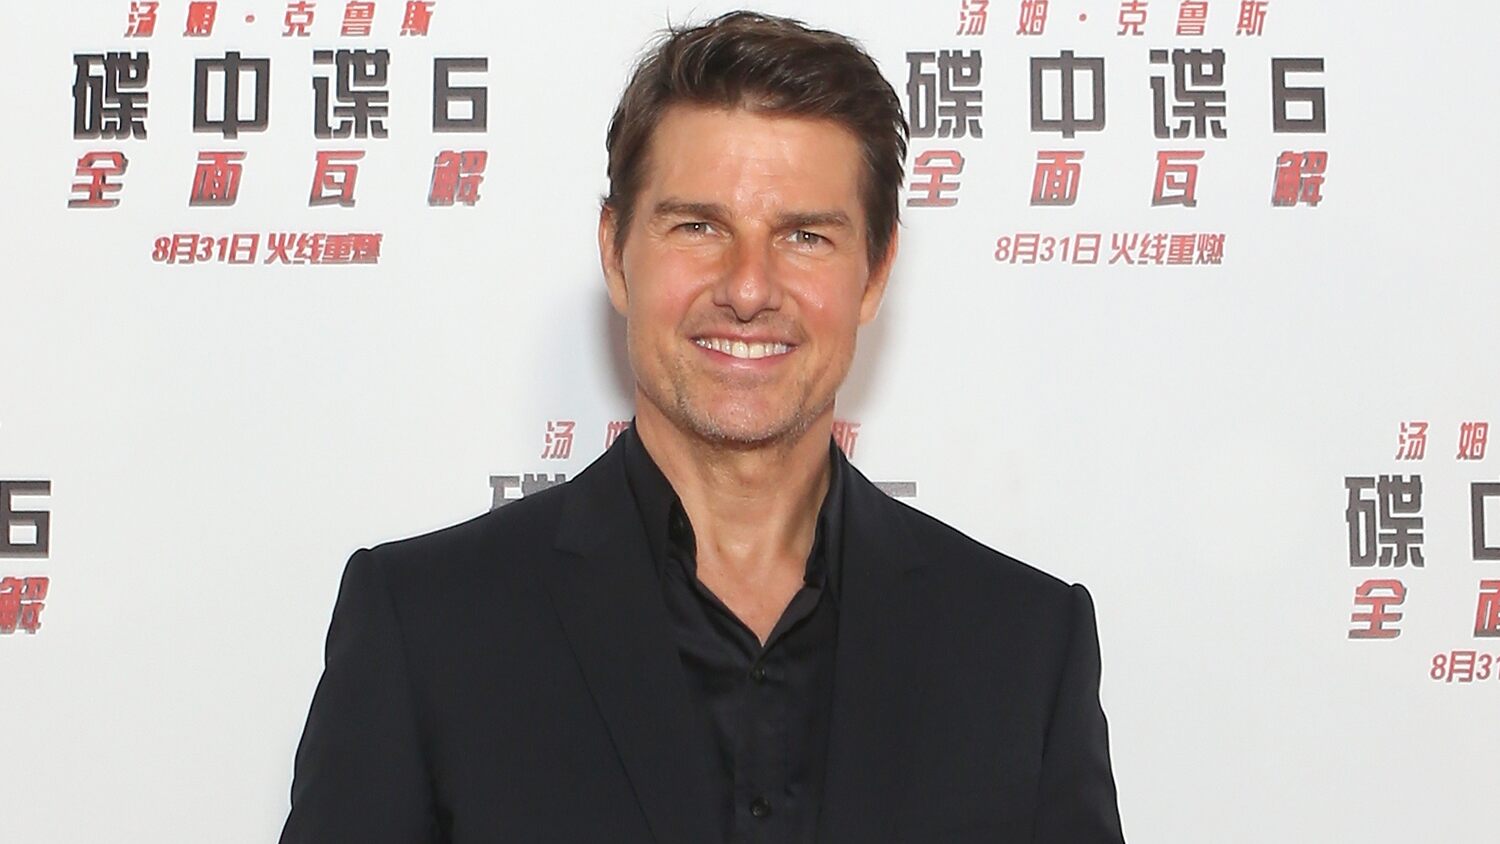 Tom Cruise pays for 'Mission: Impossible 7' cast, crew to live aboard ships amid corona virus infection